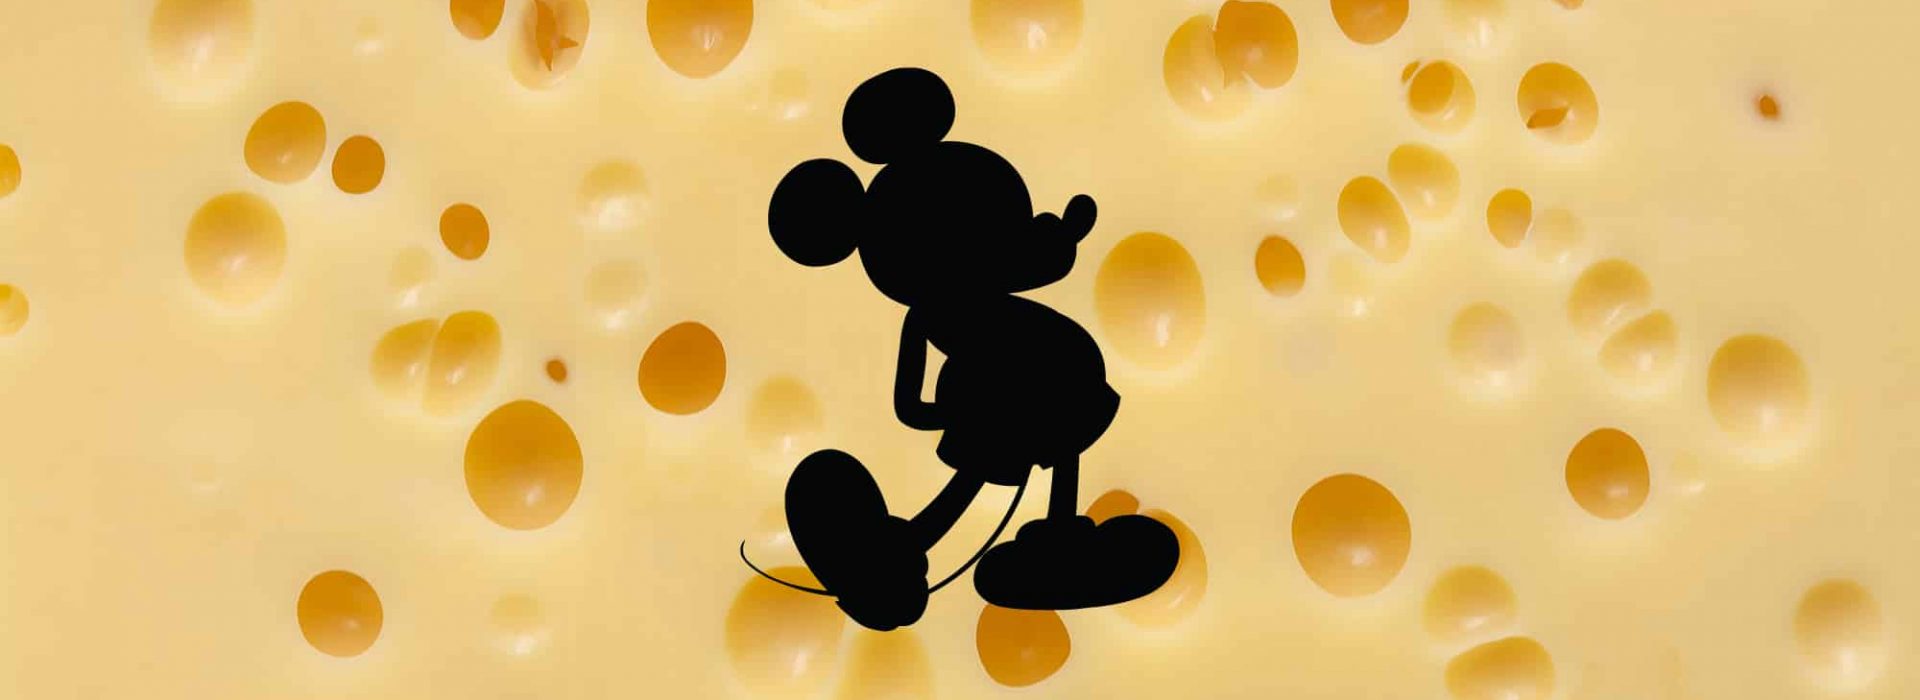 Mickey Mouse Cheese Desserts Blog Image. Image du Blog Mickey Mouse et Desserts au Fromage.